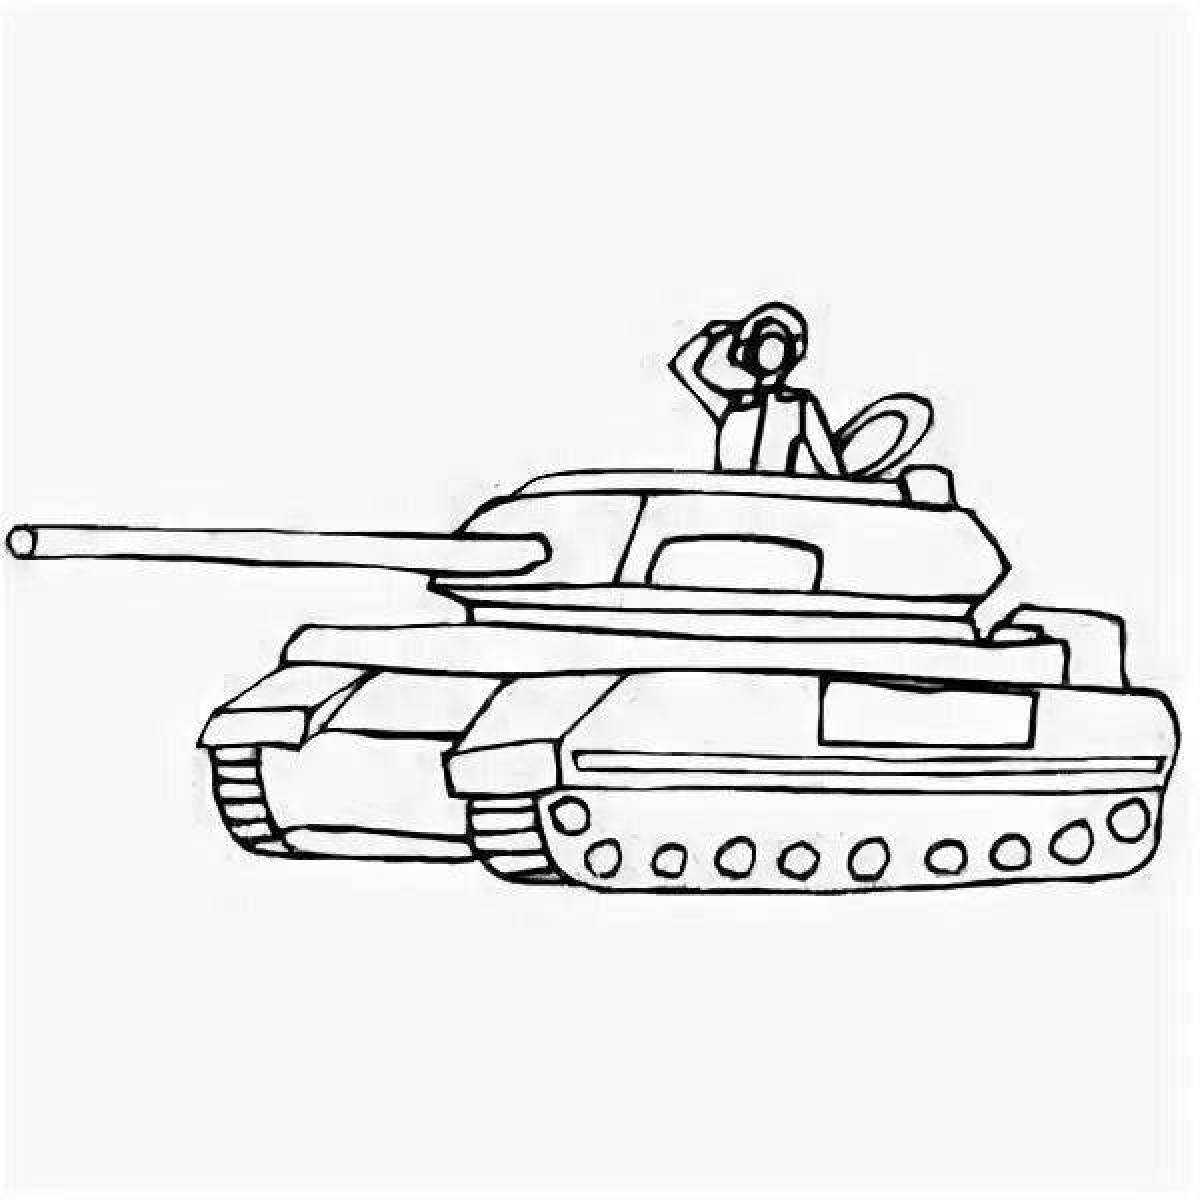 Exquisite soldier and tank coloring page